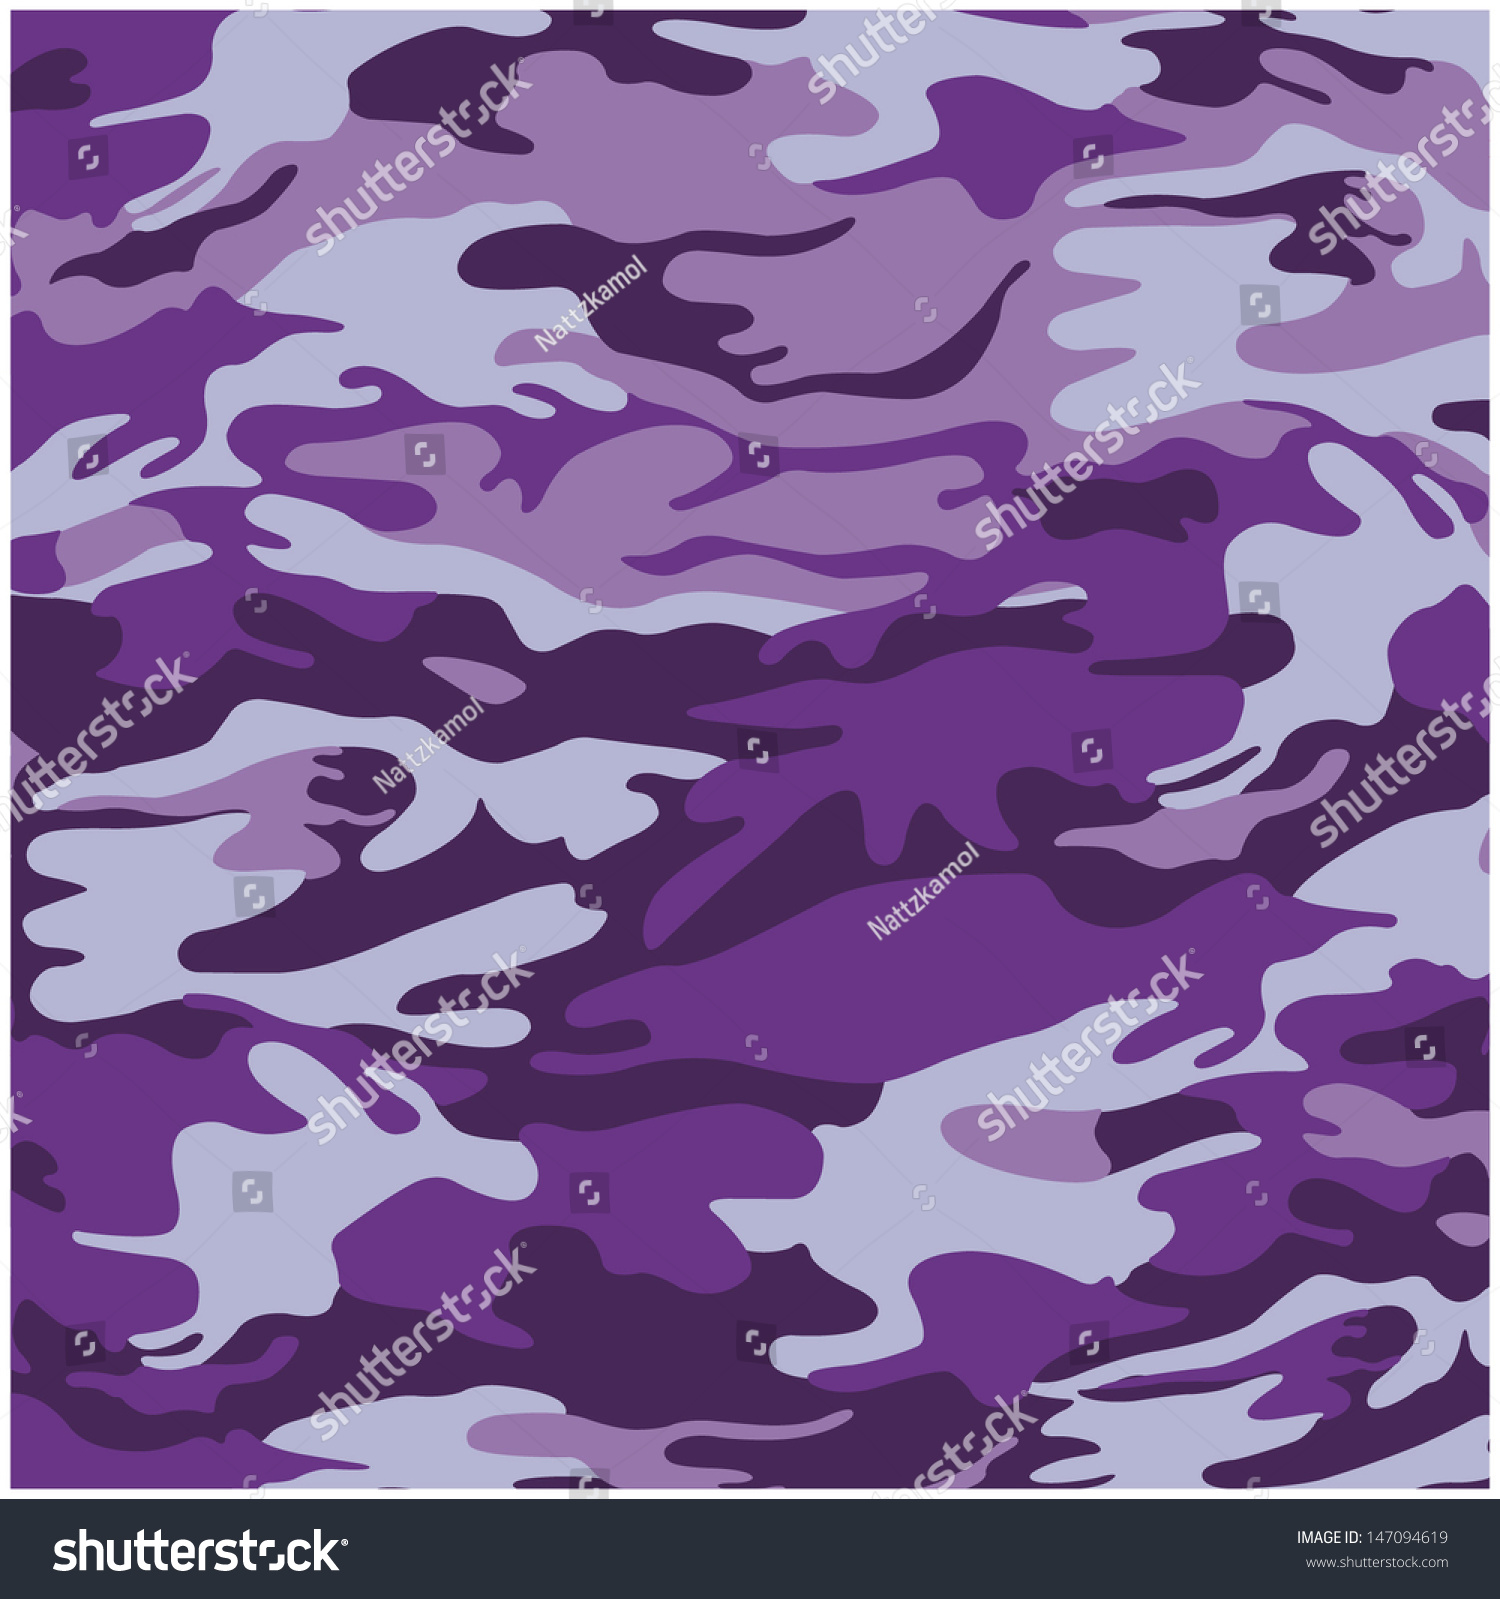 Military Camouflage Purple Background Stock Vector (Royalty Free) 147094619